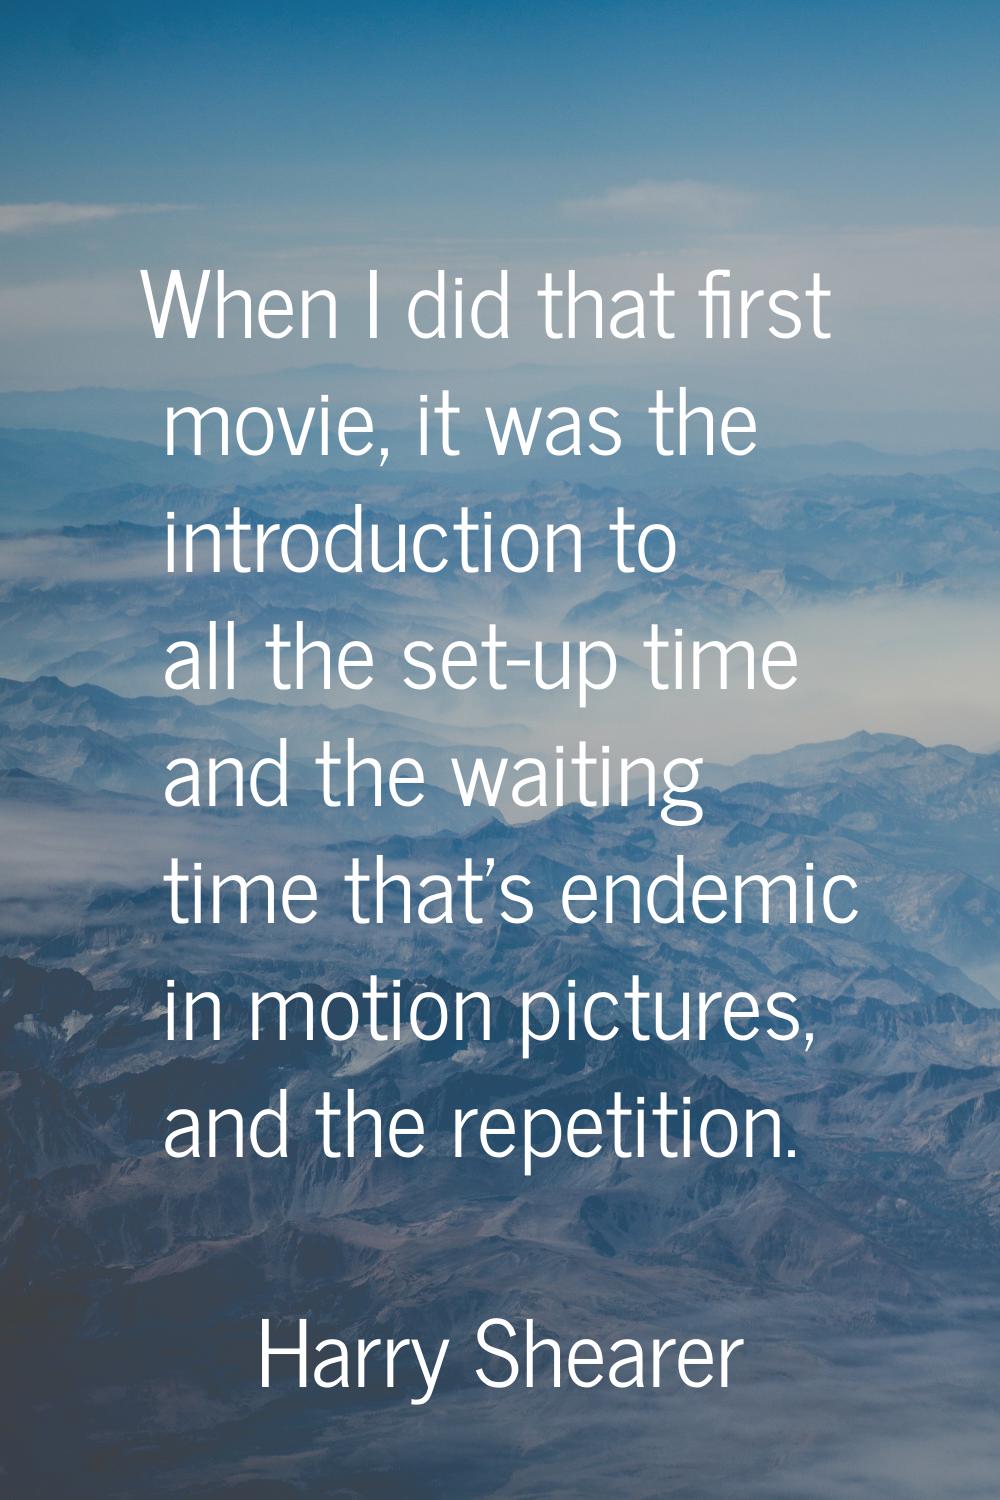 When I did that first movie, it was the introduction to all the set-up time and the waiting time th